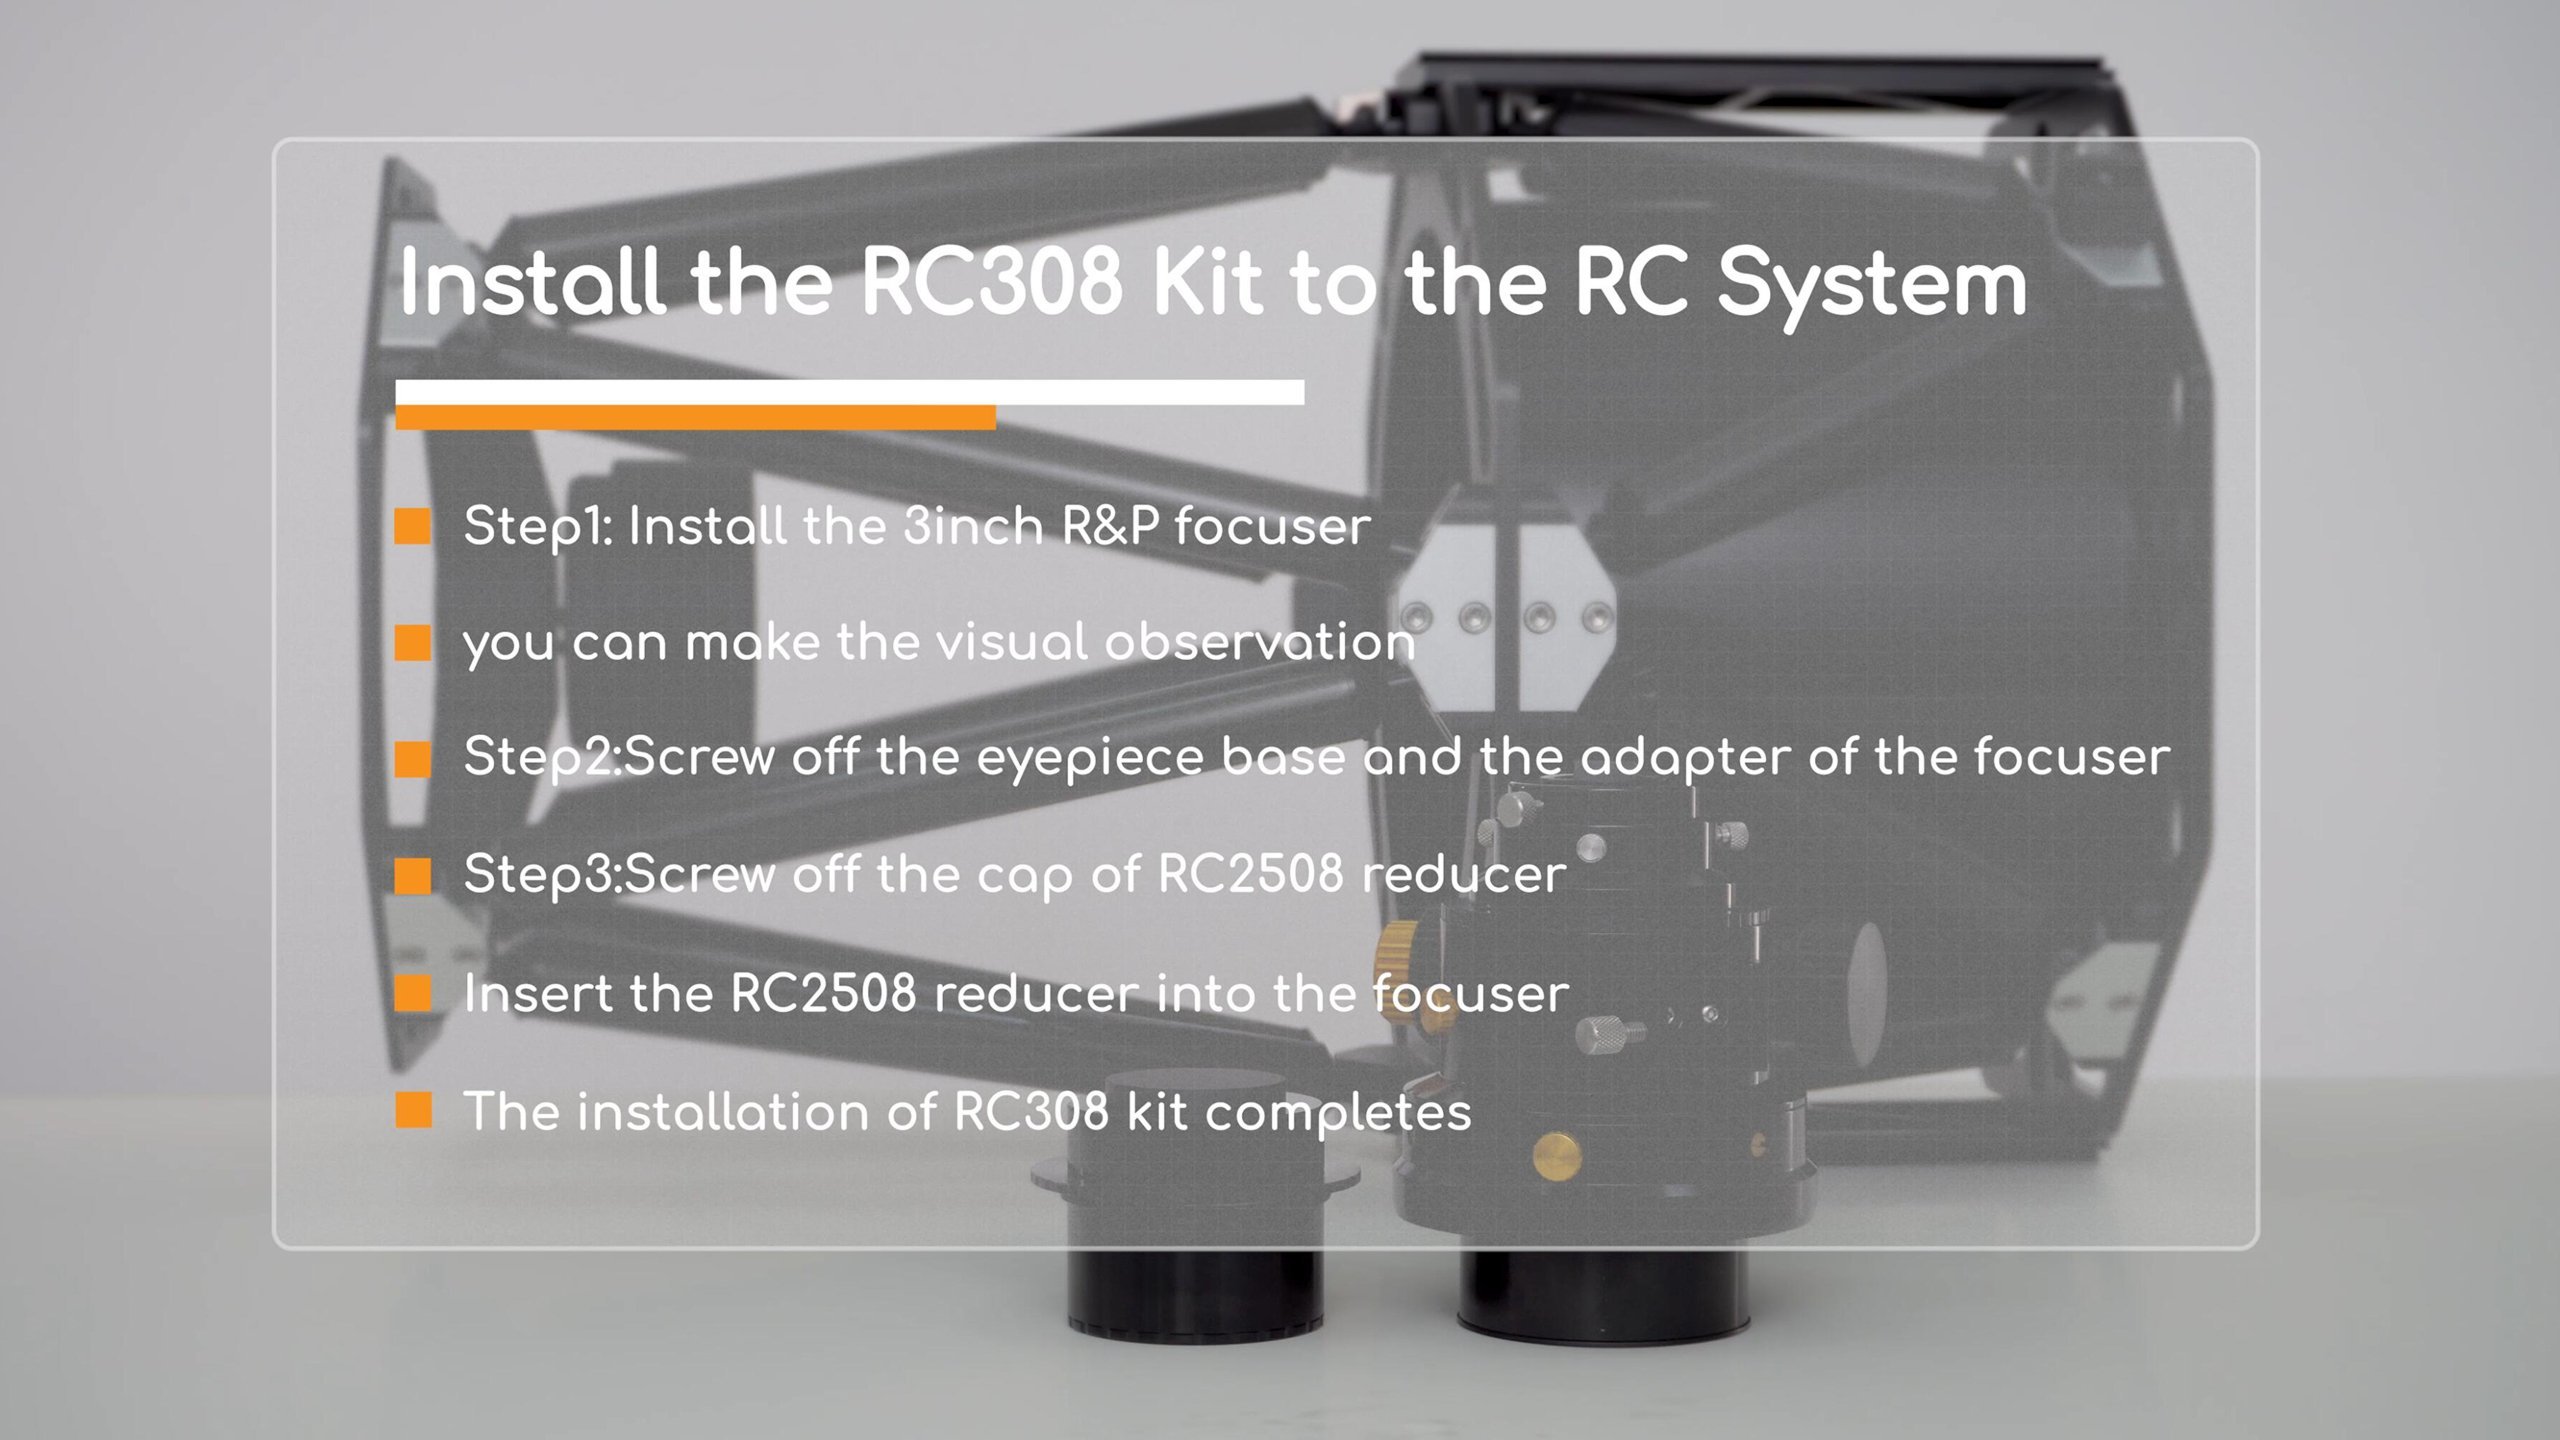 Install the Sharpstar RC308 Kit to the RC System